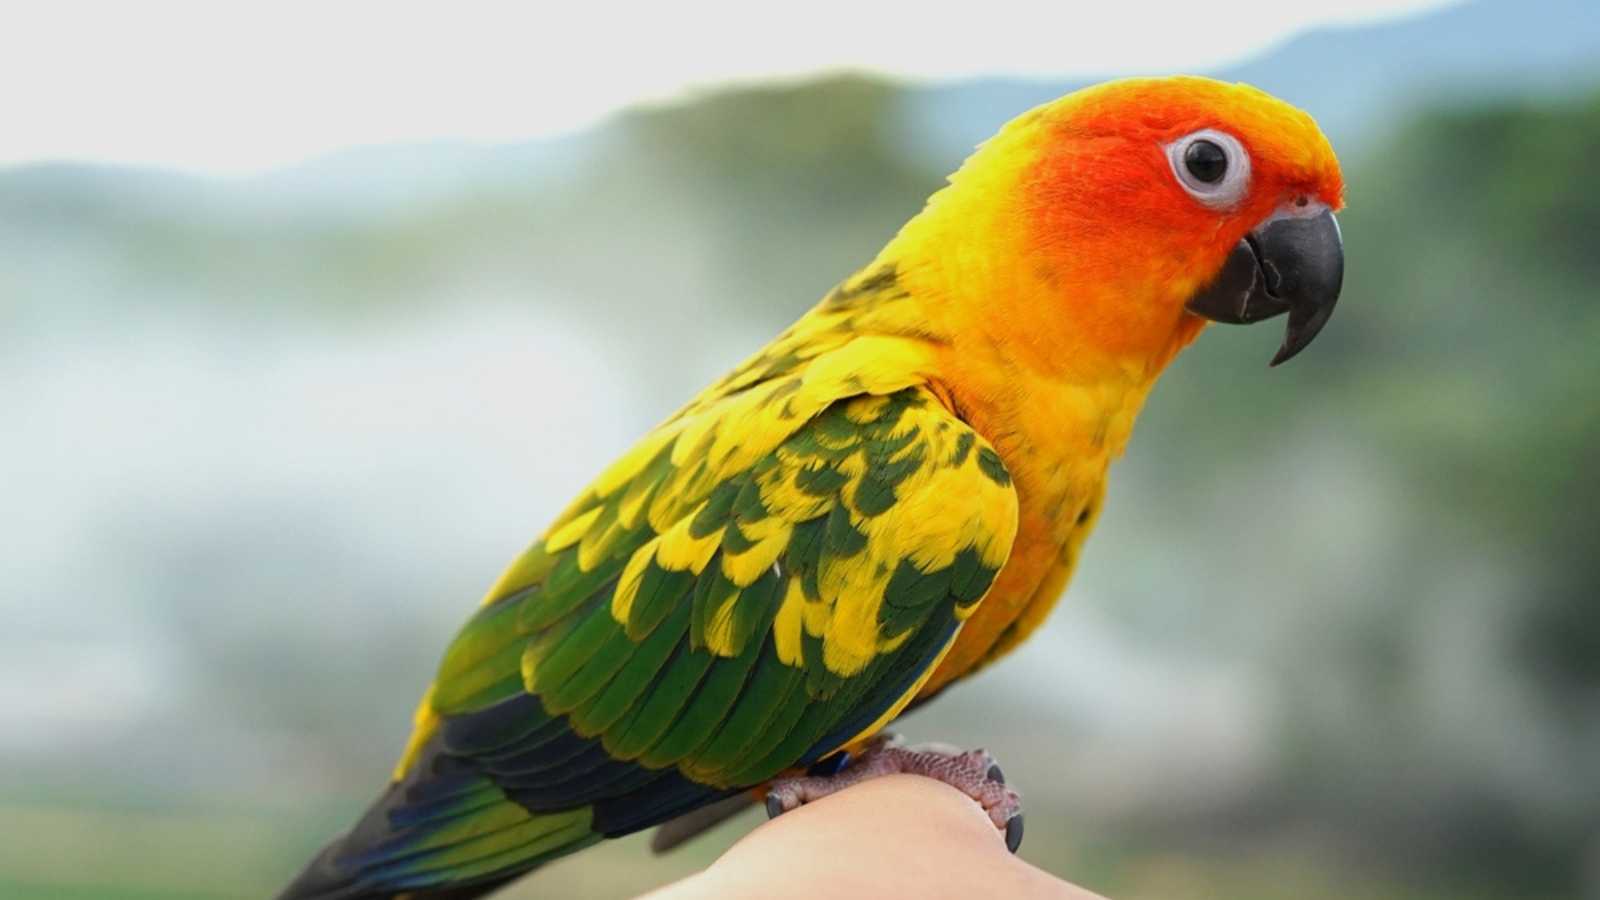 Sun conure parrot or bird Beautiful is aratinga has yellow on hand background Blur mountains and sky, (Aratinga solstitialis) exotic pet adorable, native to amazon 